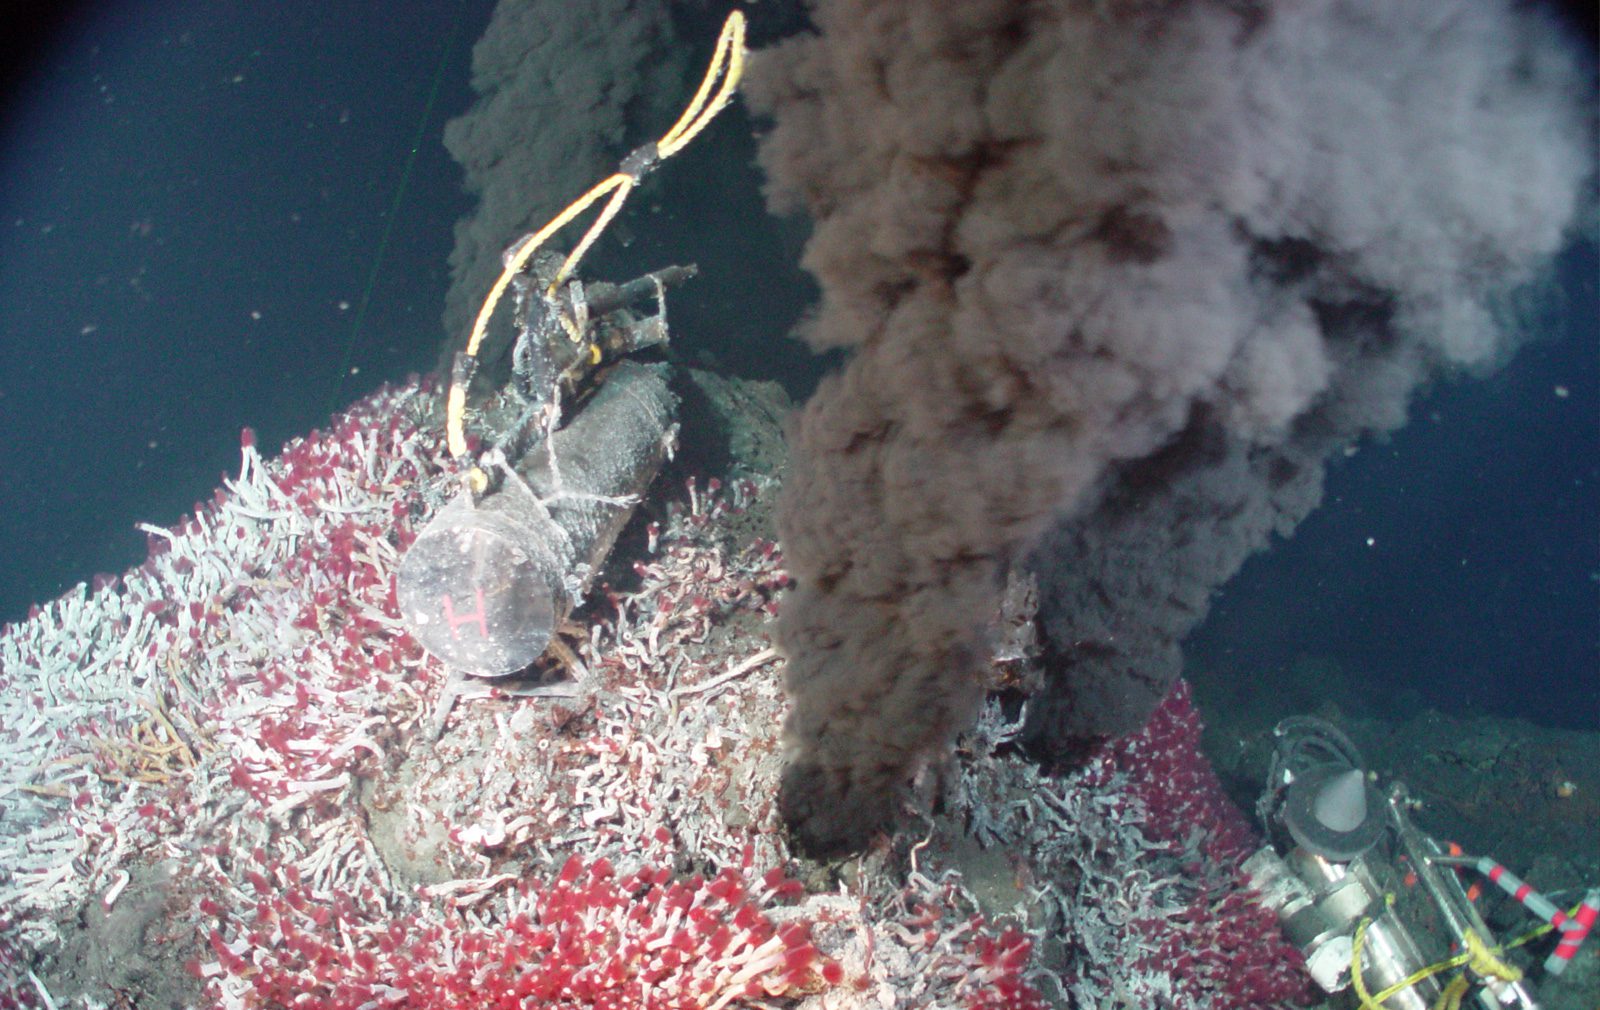 hydrothermal vents creatures